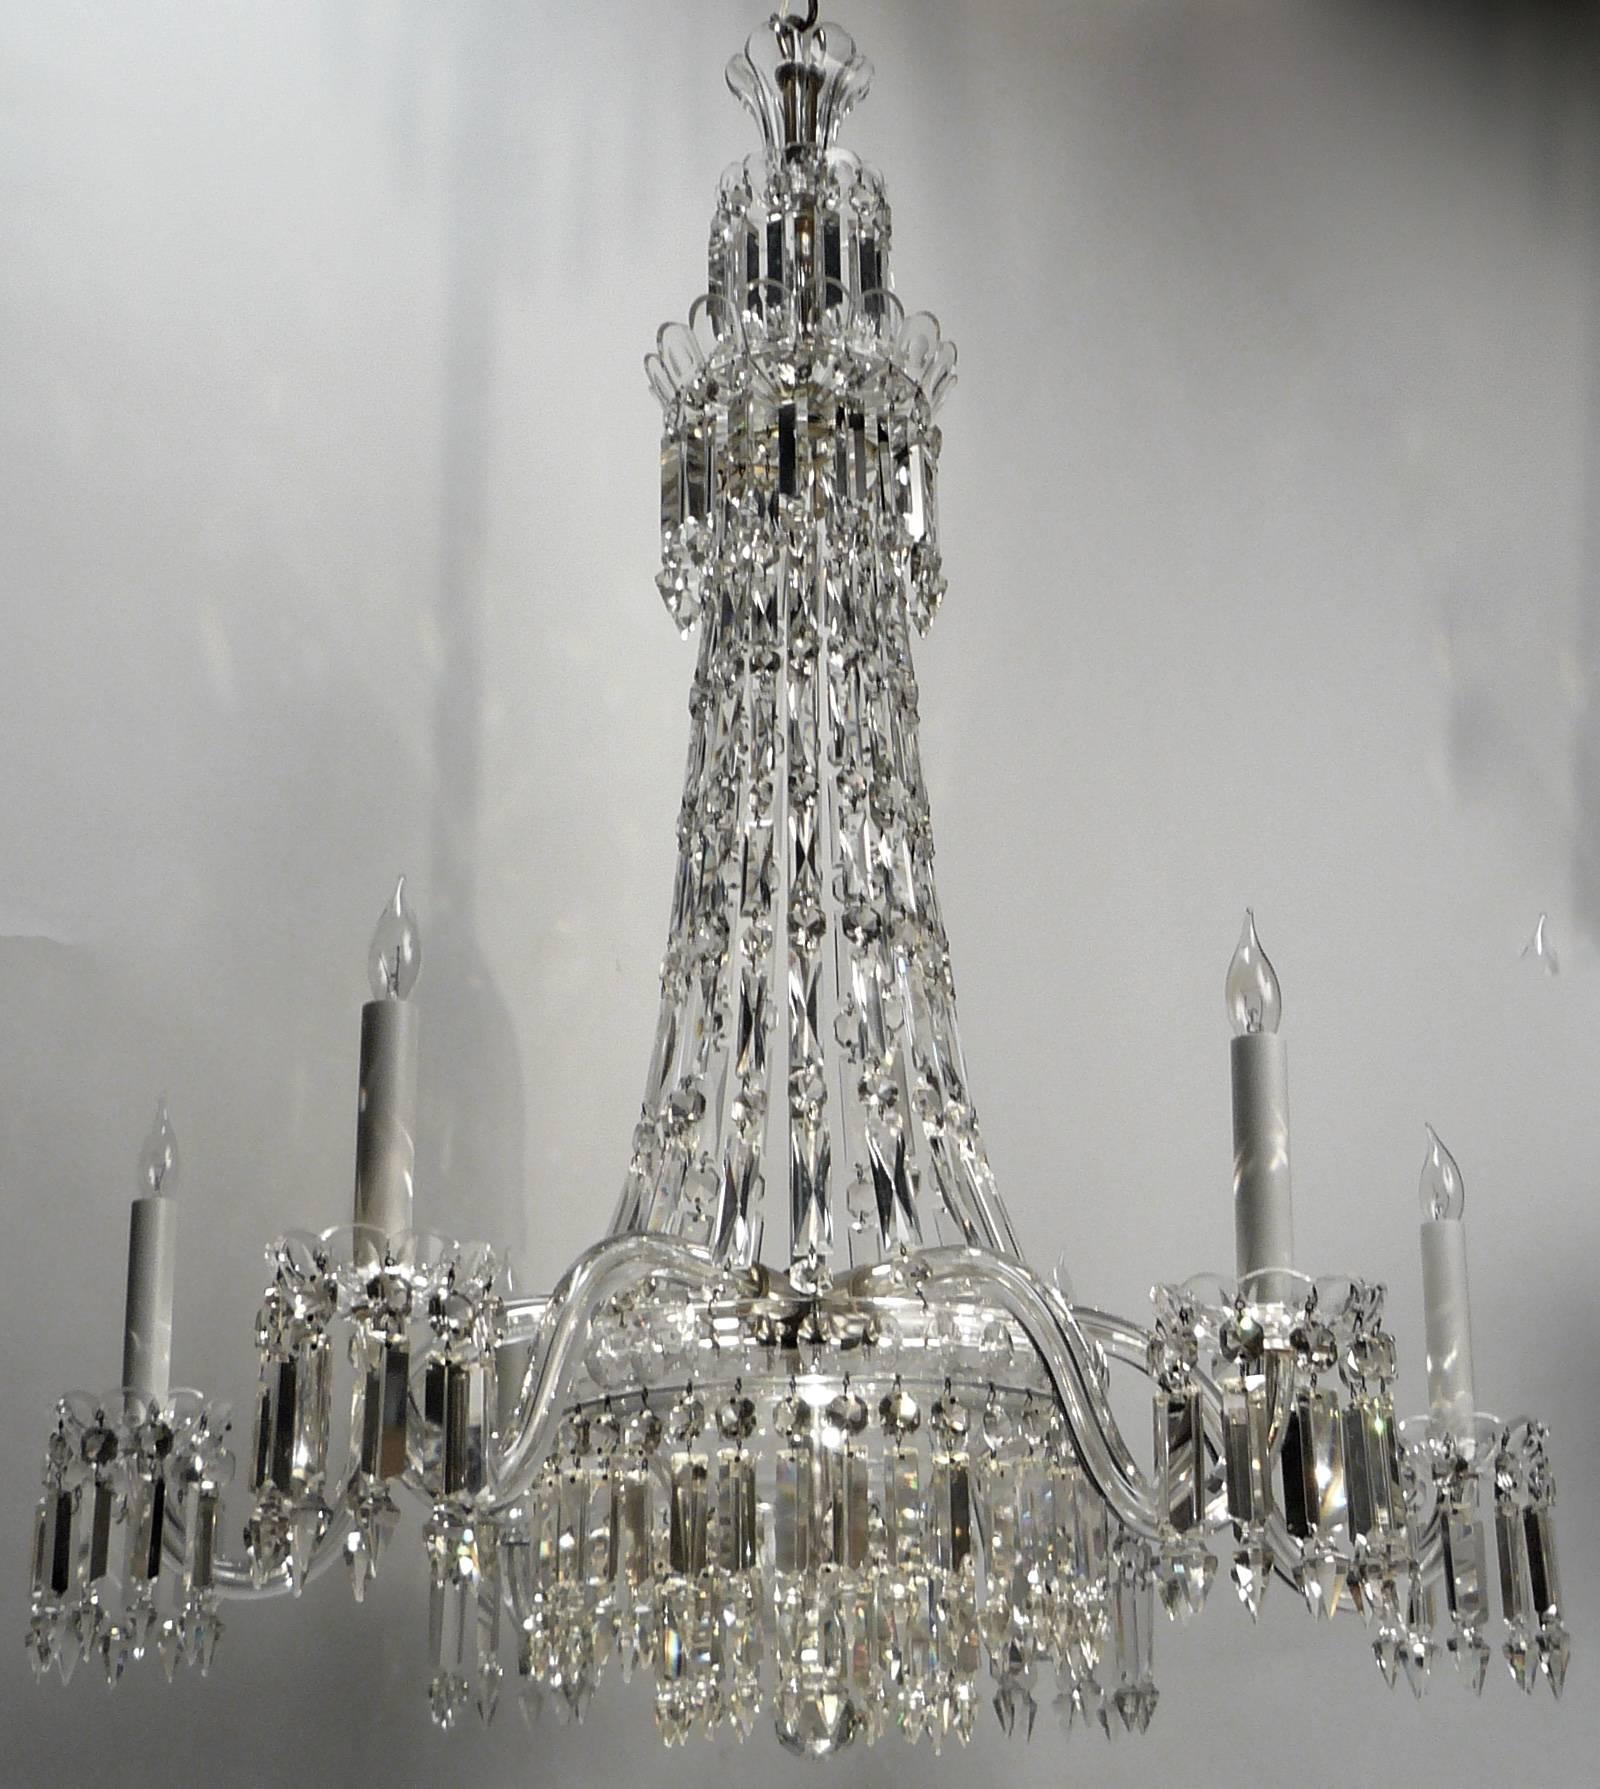 Early Victorian 19th Century English Crystal Chandelier by F & C Osler